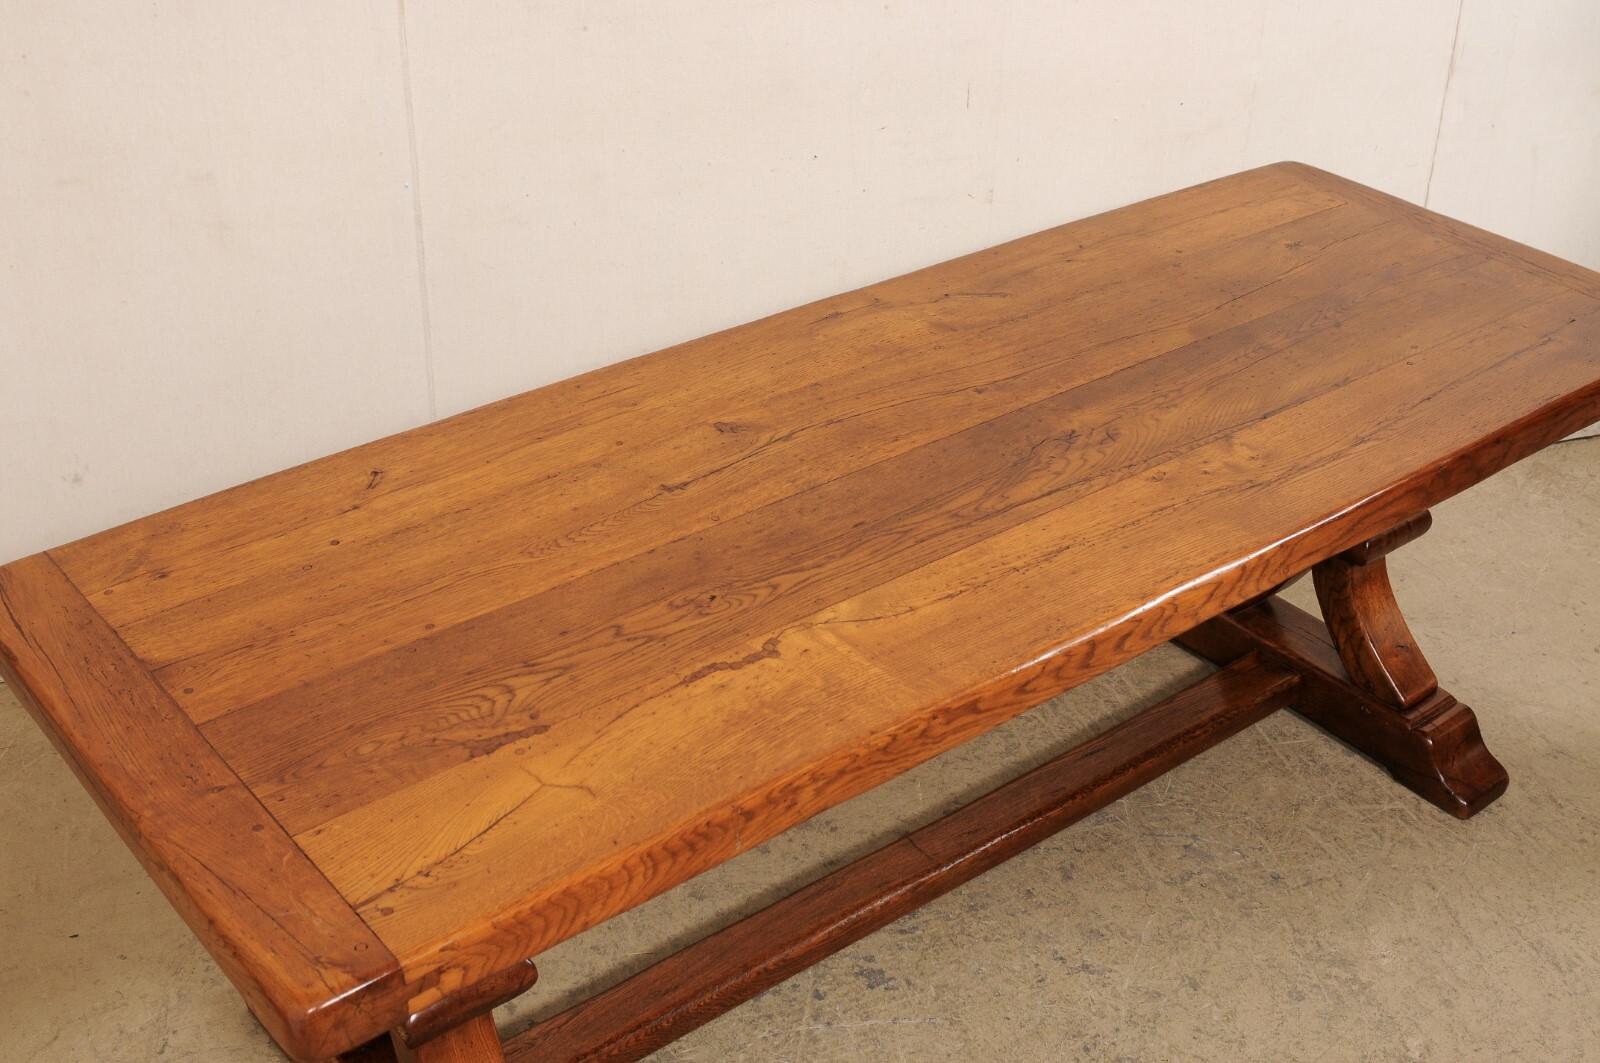 20th Century Antique French Wooden Dining Table w/Nicely Carved Trestle Legs, 7+ Ft Long For Sale